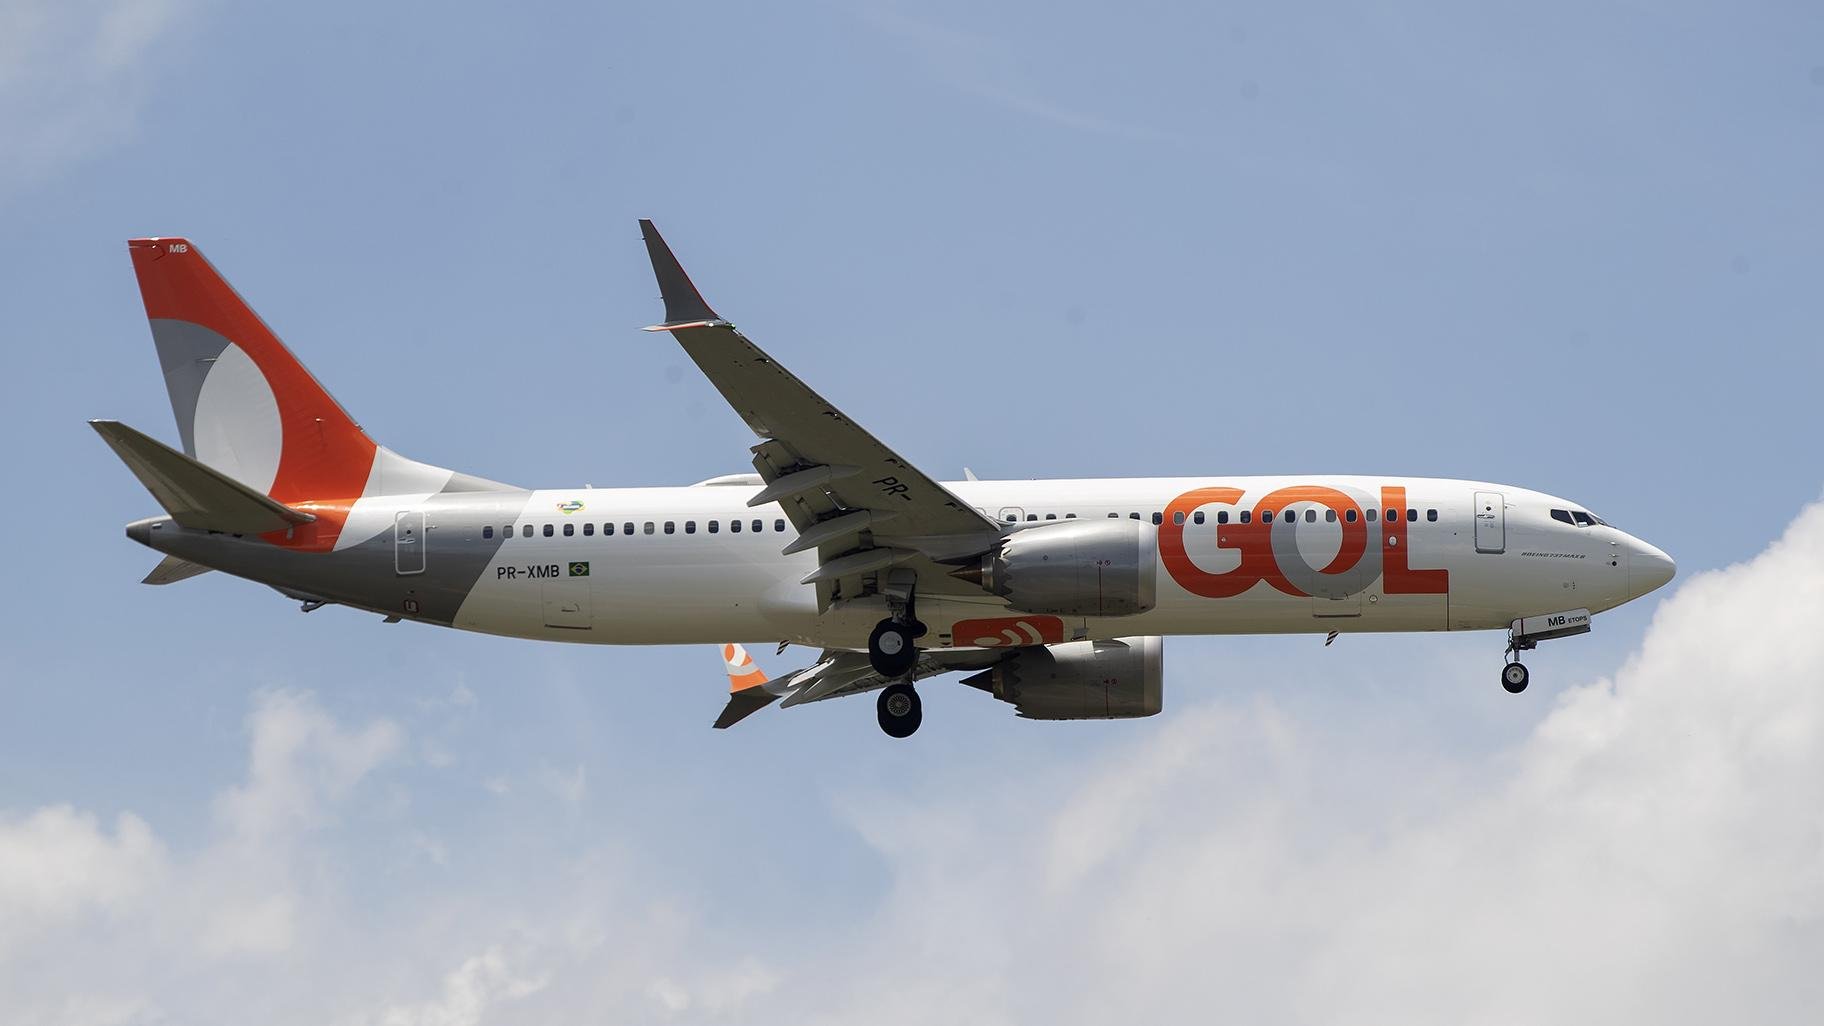 A Gol Airlines Boeing 737 Max plane approaches to land at the international airport in Guarulhos, near Sao Paulo, Brazil, Wednesday, Dec. 9, 2020. (AP Photo / Andre Penner)